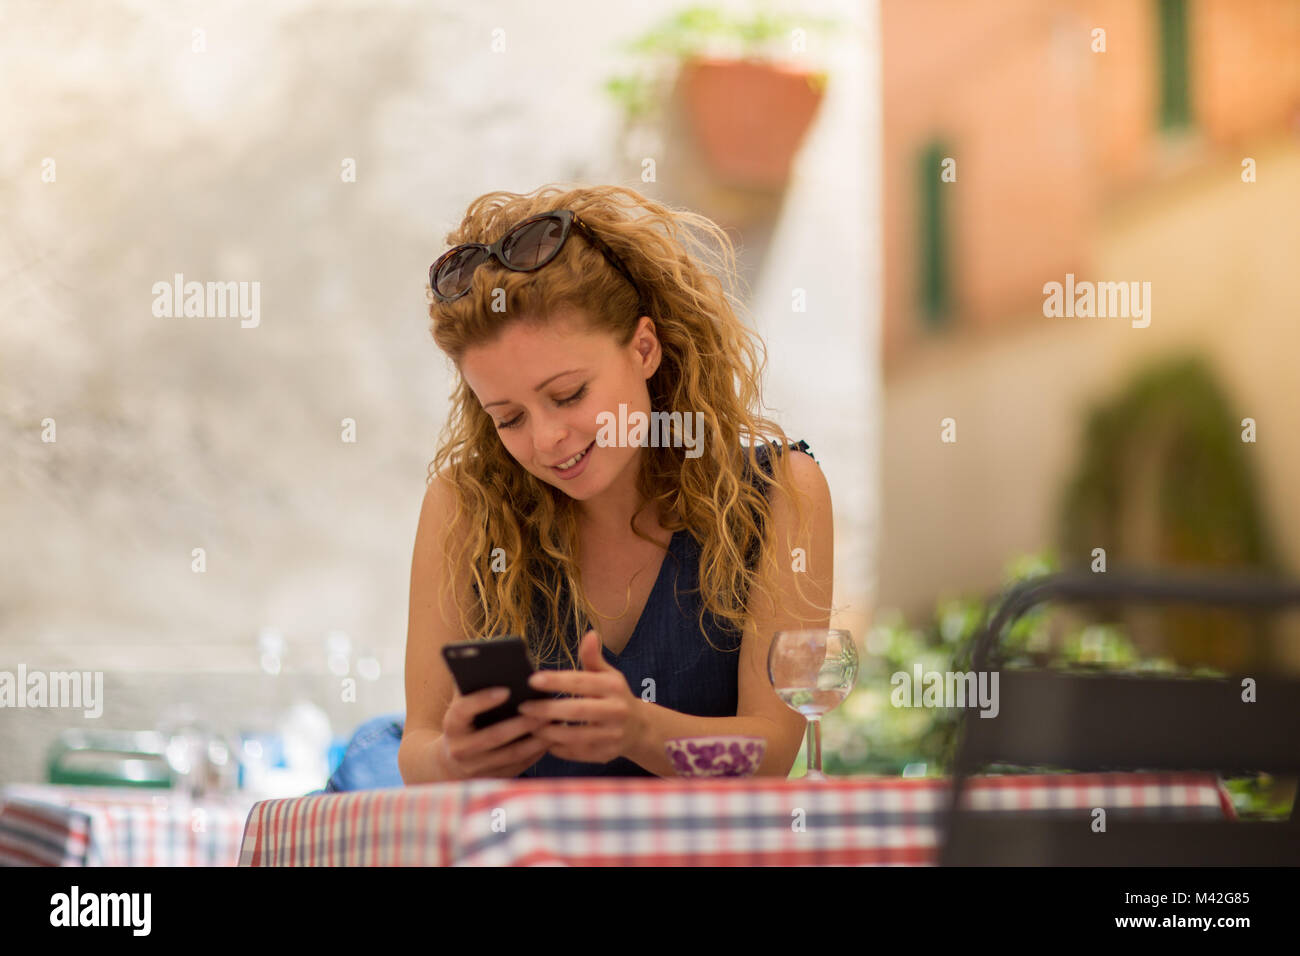 Young adult female sitting at café with smartphone Stock Photo